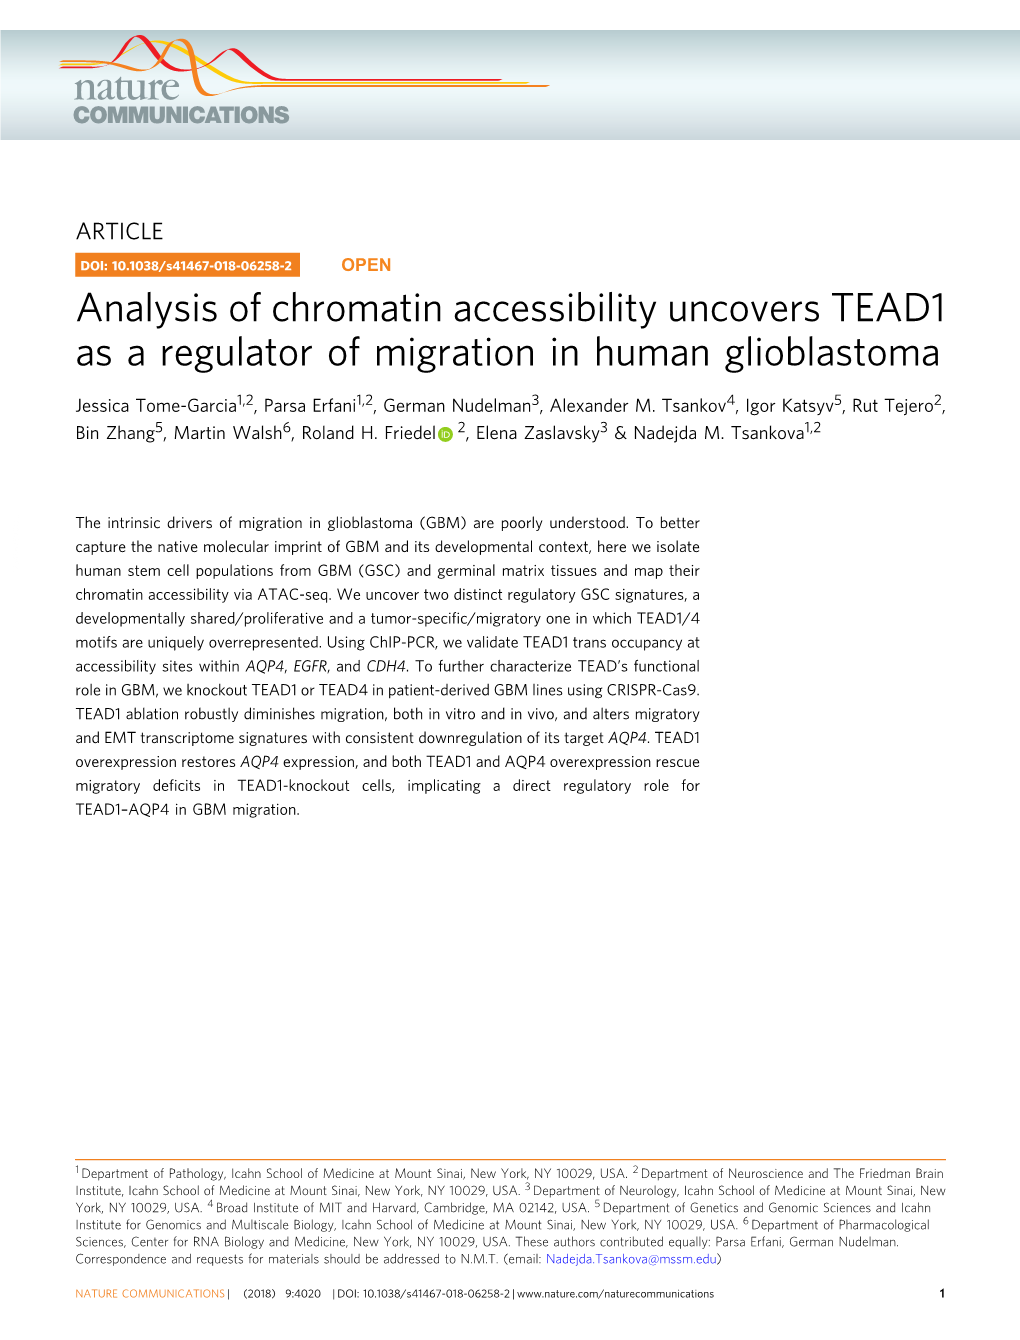 Analysis of Chromatin Accessibility Uncovers TEAD1 As a Regulator of Migration in Human Glioblastoma